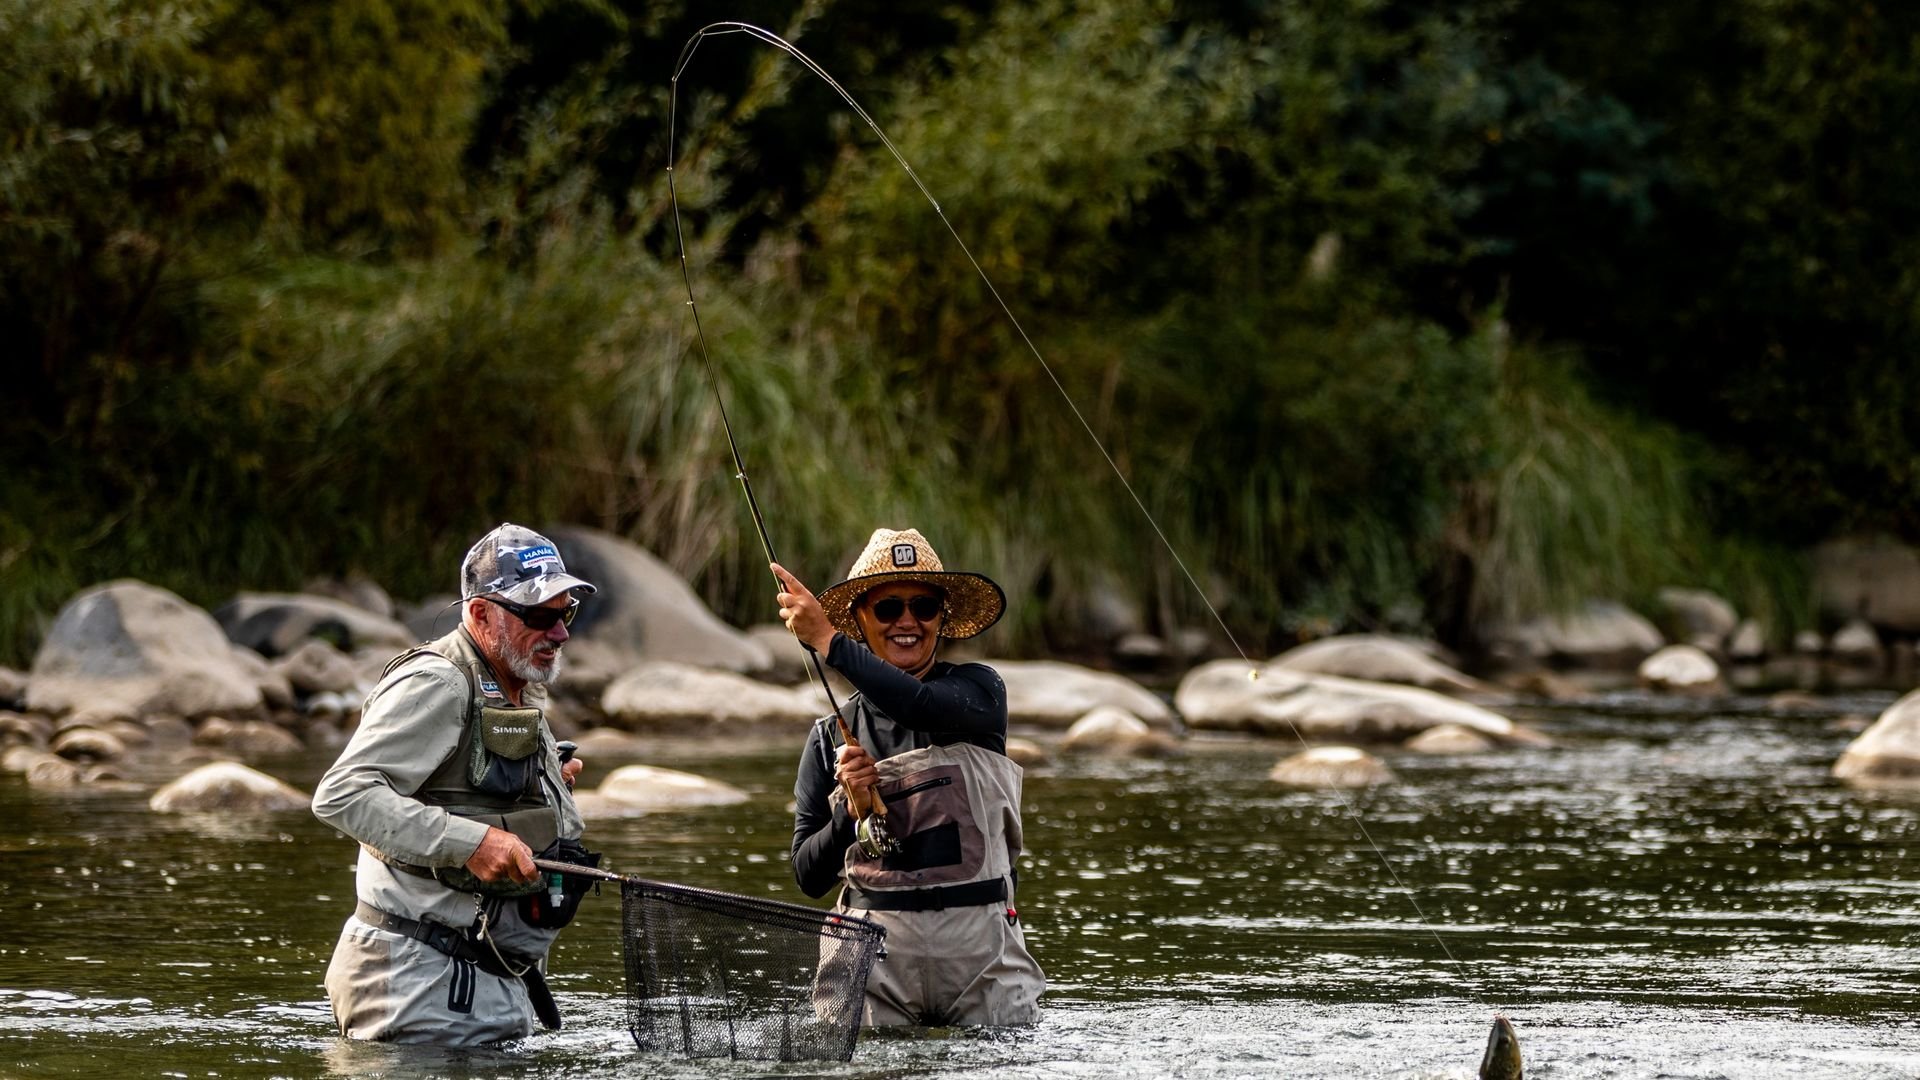 Fishing with a guide on the Whanganui River - Visit Ruapehu.jpg